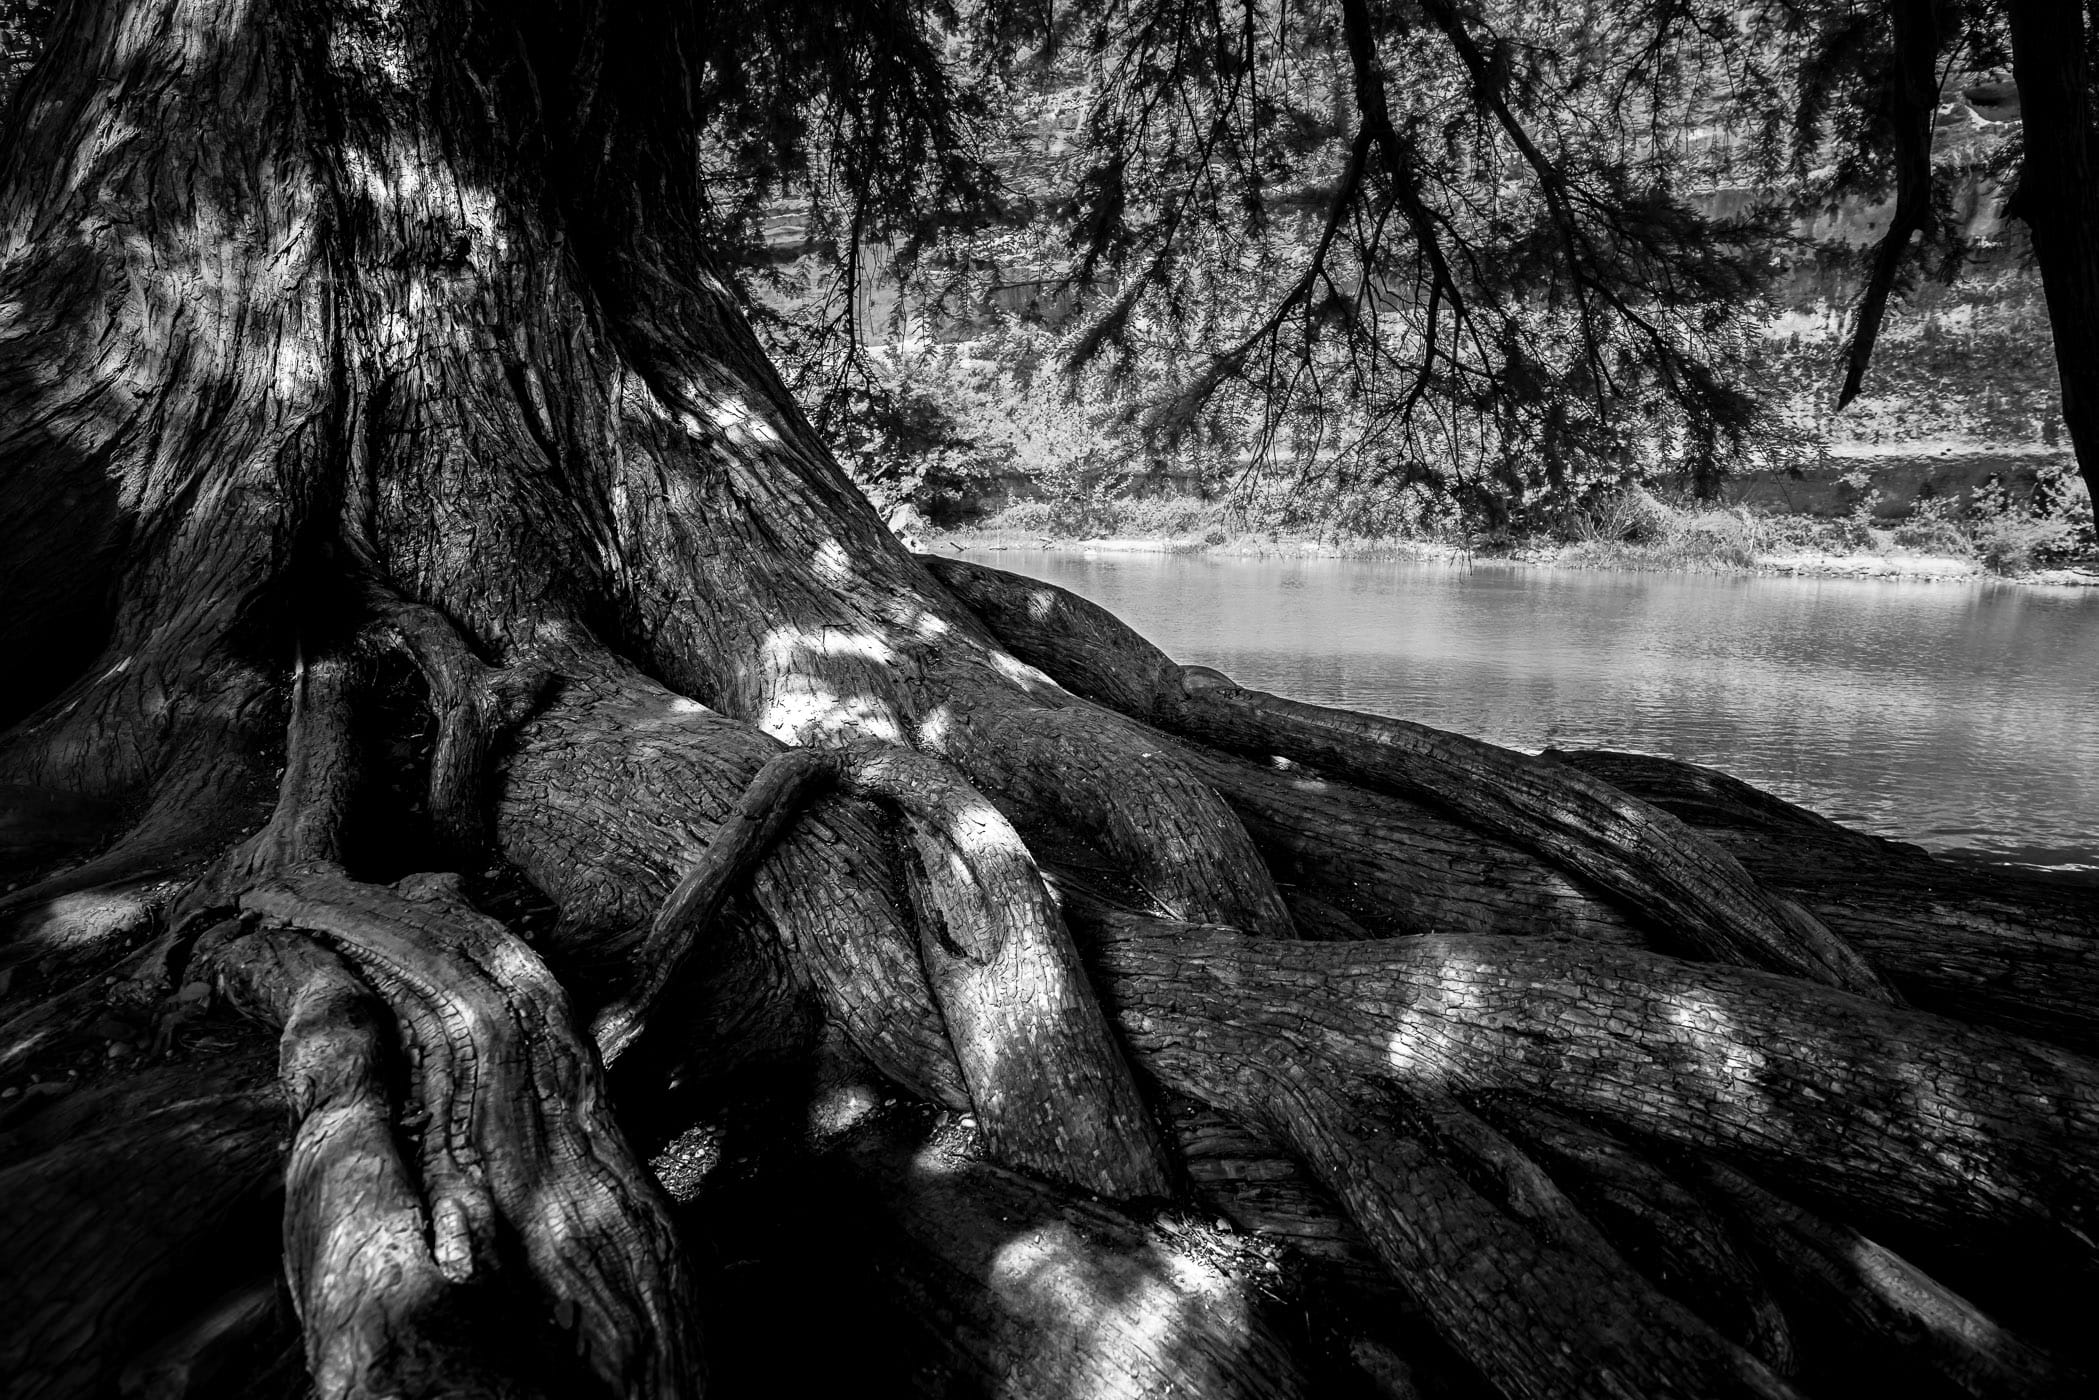 The massive roots of a tree along the banks of the Guadalupe River at Texas' Guadalupe River State Park.